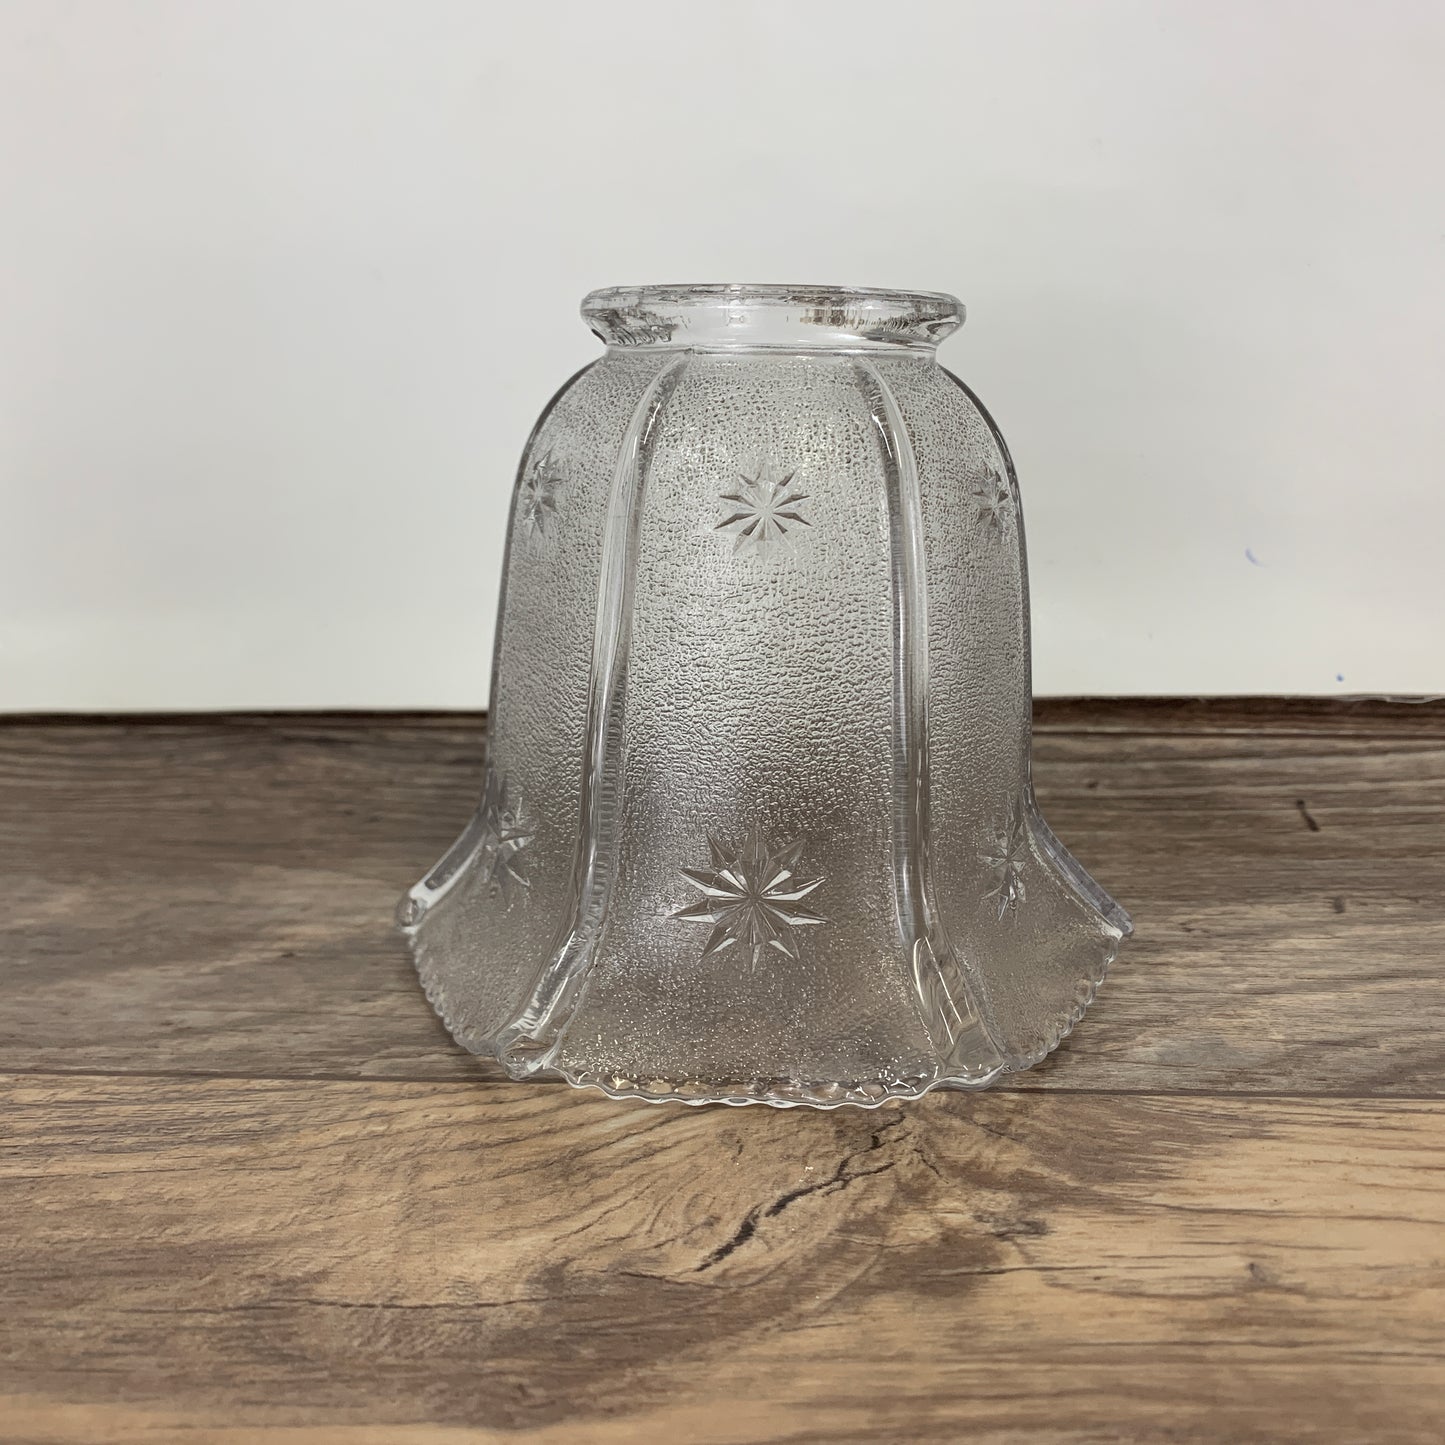 Small Glass Lampshade with Raised Star Pattern, Bell Shaped Lamp Shade